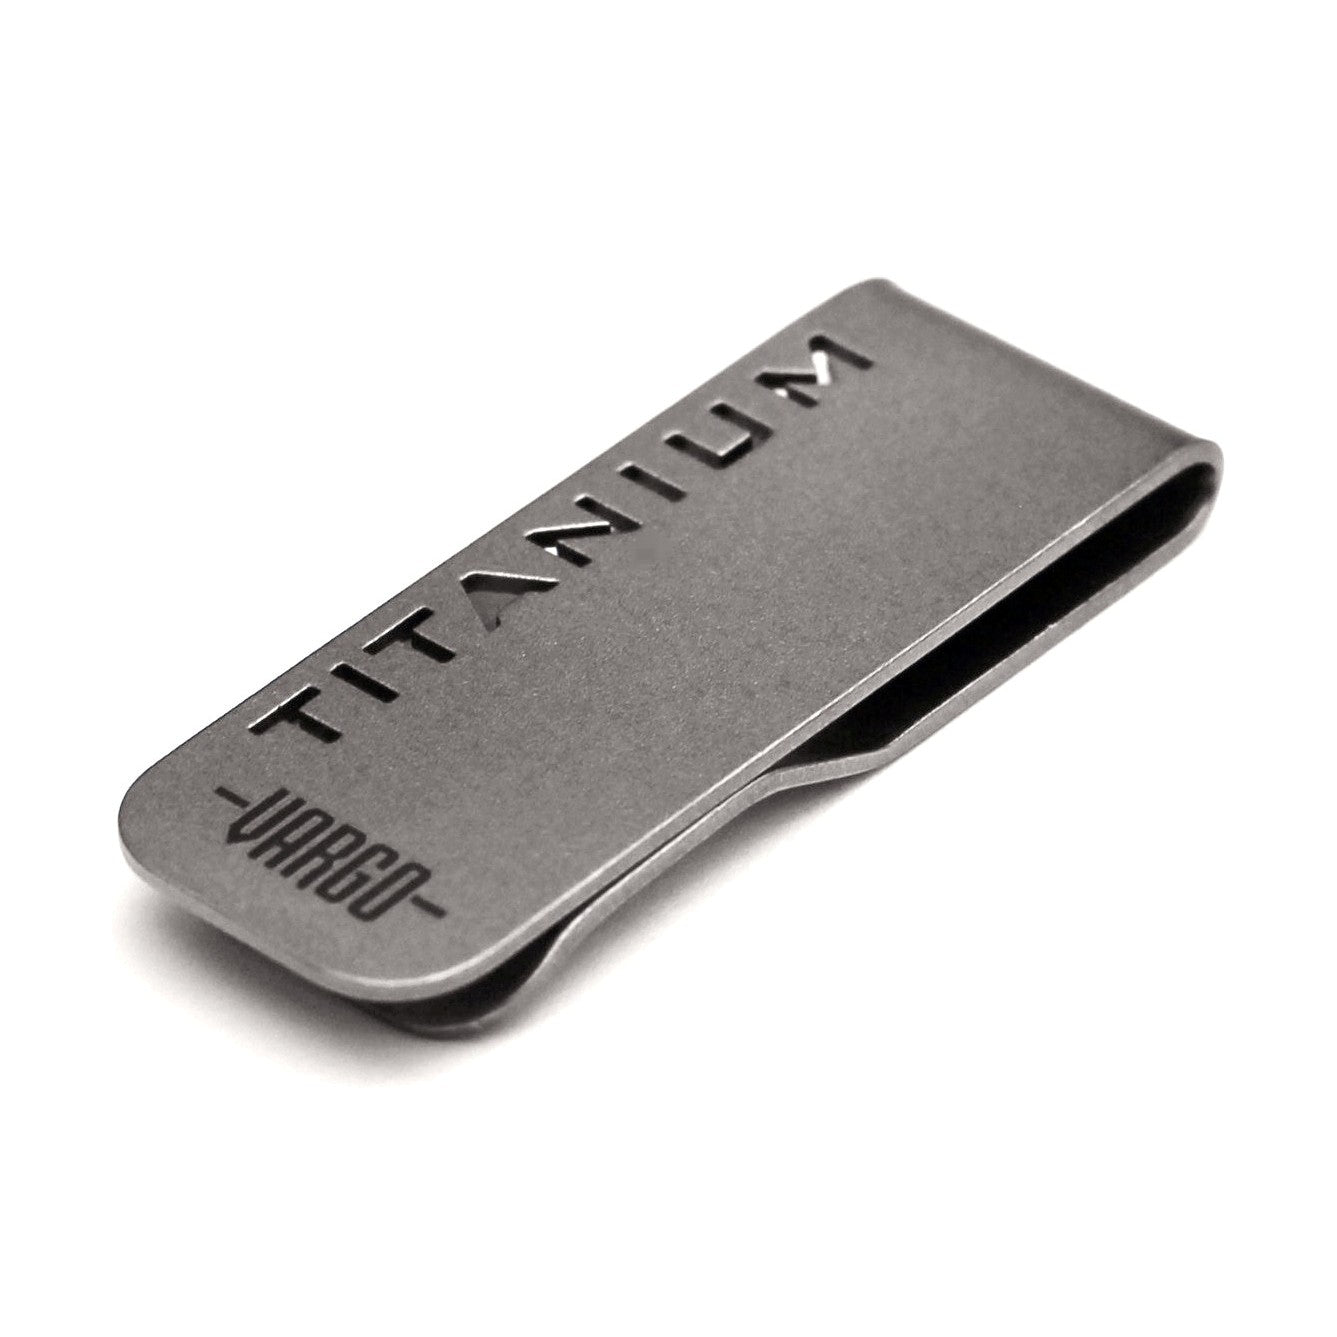 Titanium Money Clip, For The Backpacker's Wallet